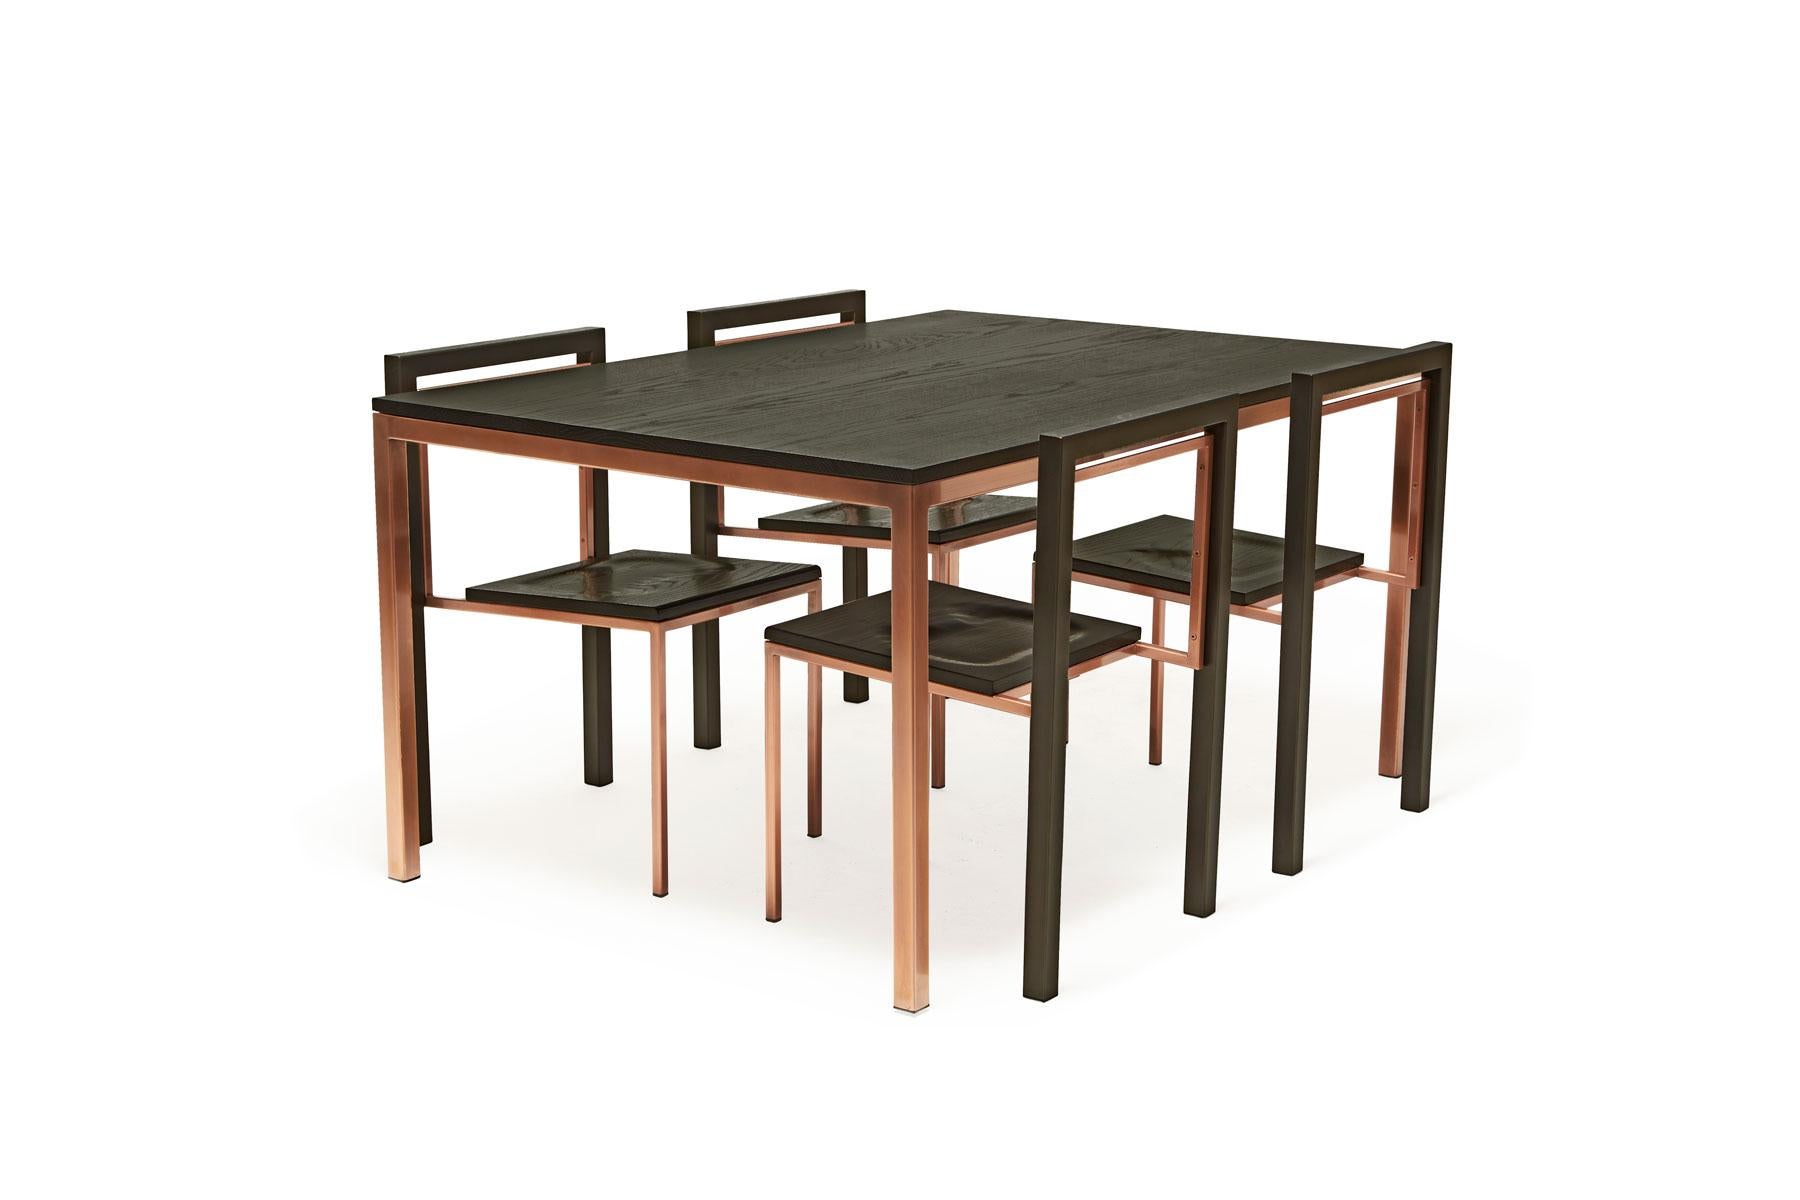 Clean lines and high quality materials are the basis of Stephen Kenn's Inheritance Collection. This simple yet elegant dining set features a solid ebonized oak tabletop with an antique copper-plated steel base. The table is paired with four matching